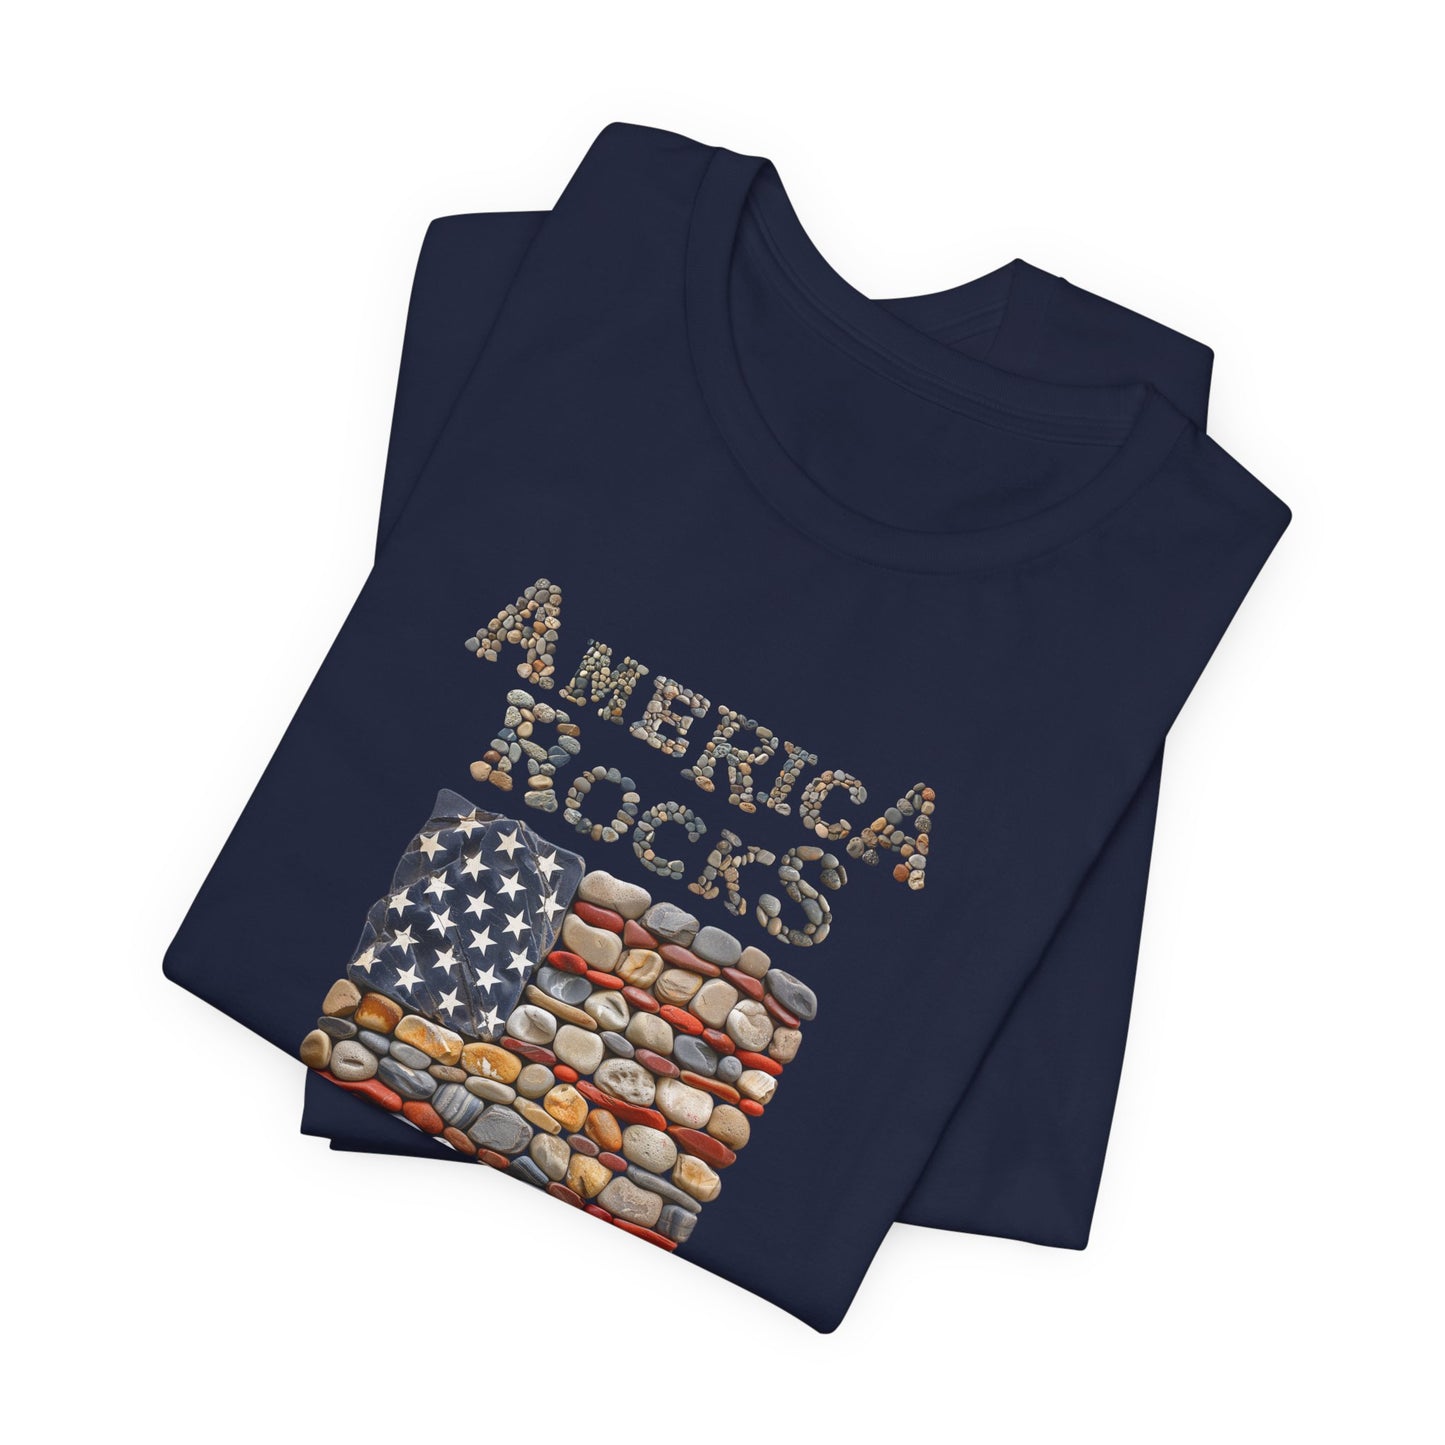 America Rocks T-Shirt, Cotton Blend Crew Neck Tee, White, Black or Navy, Featuring American Flag Design